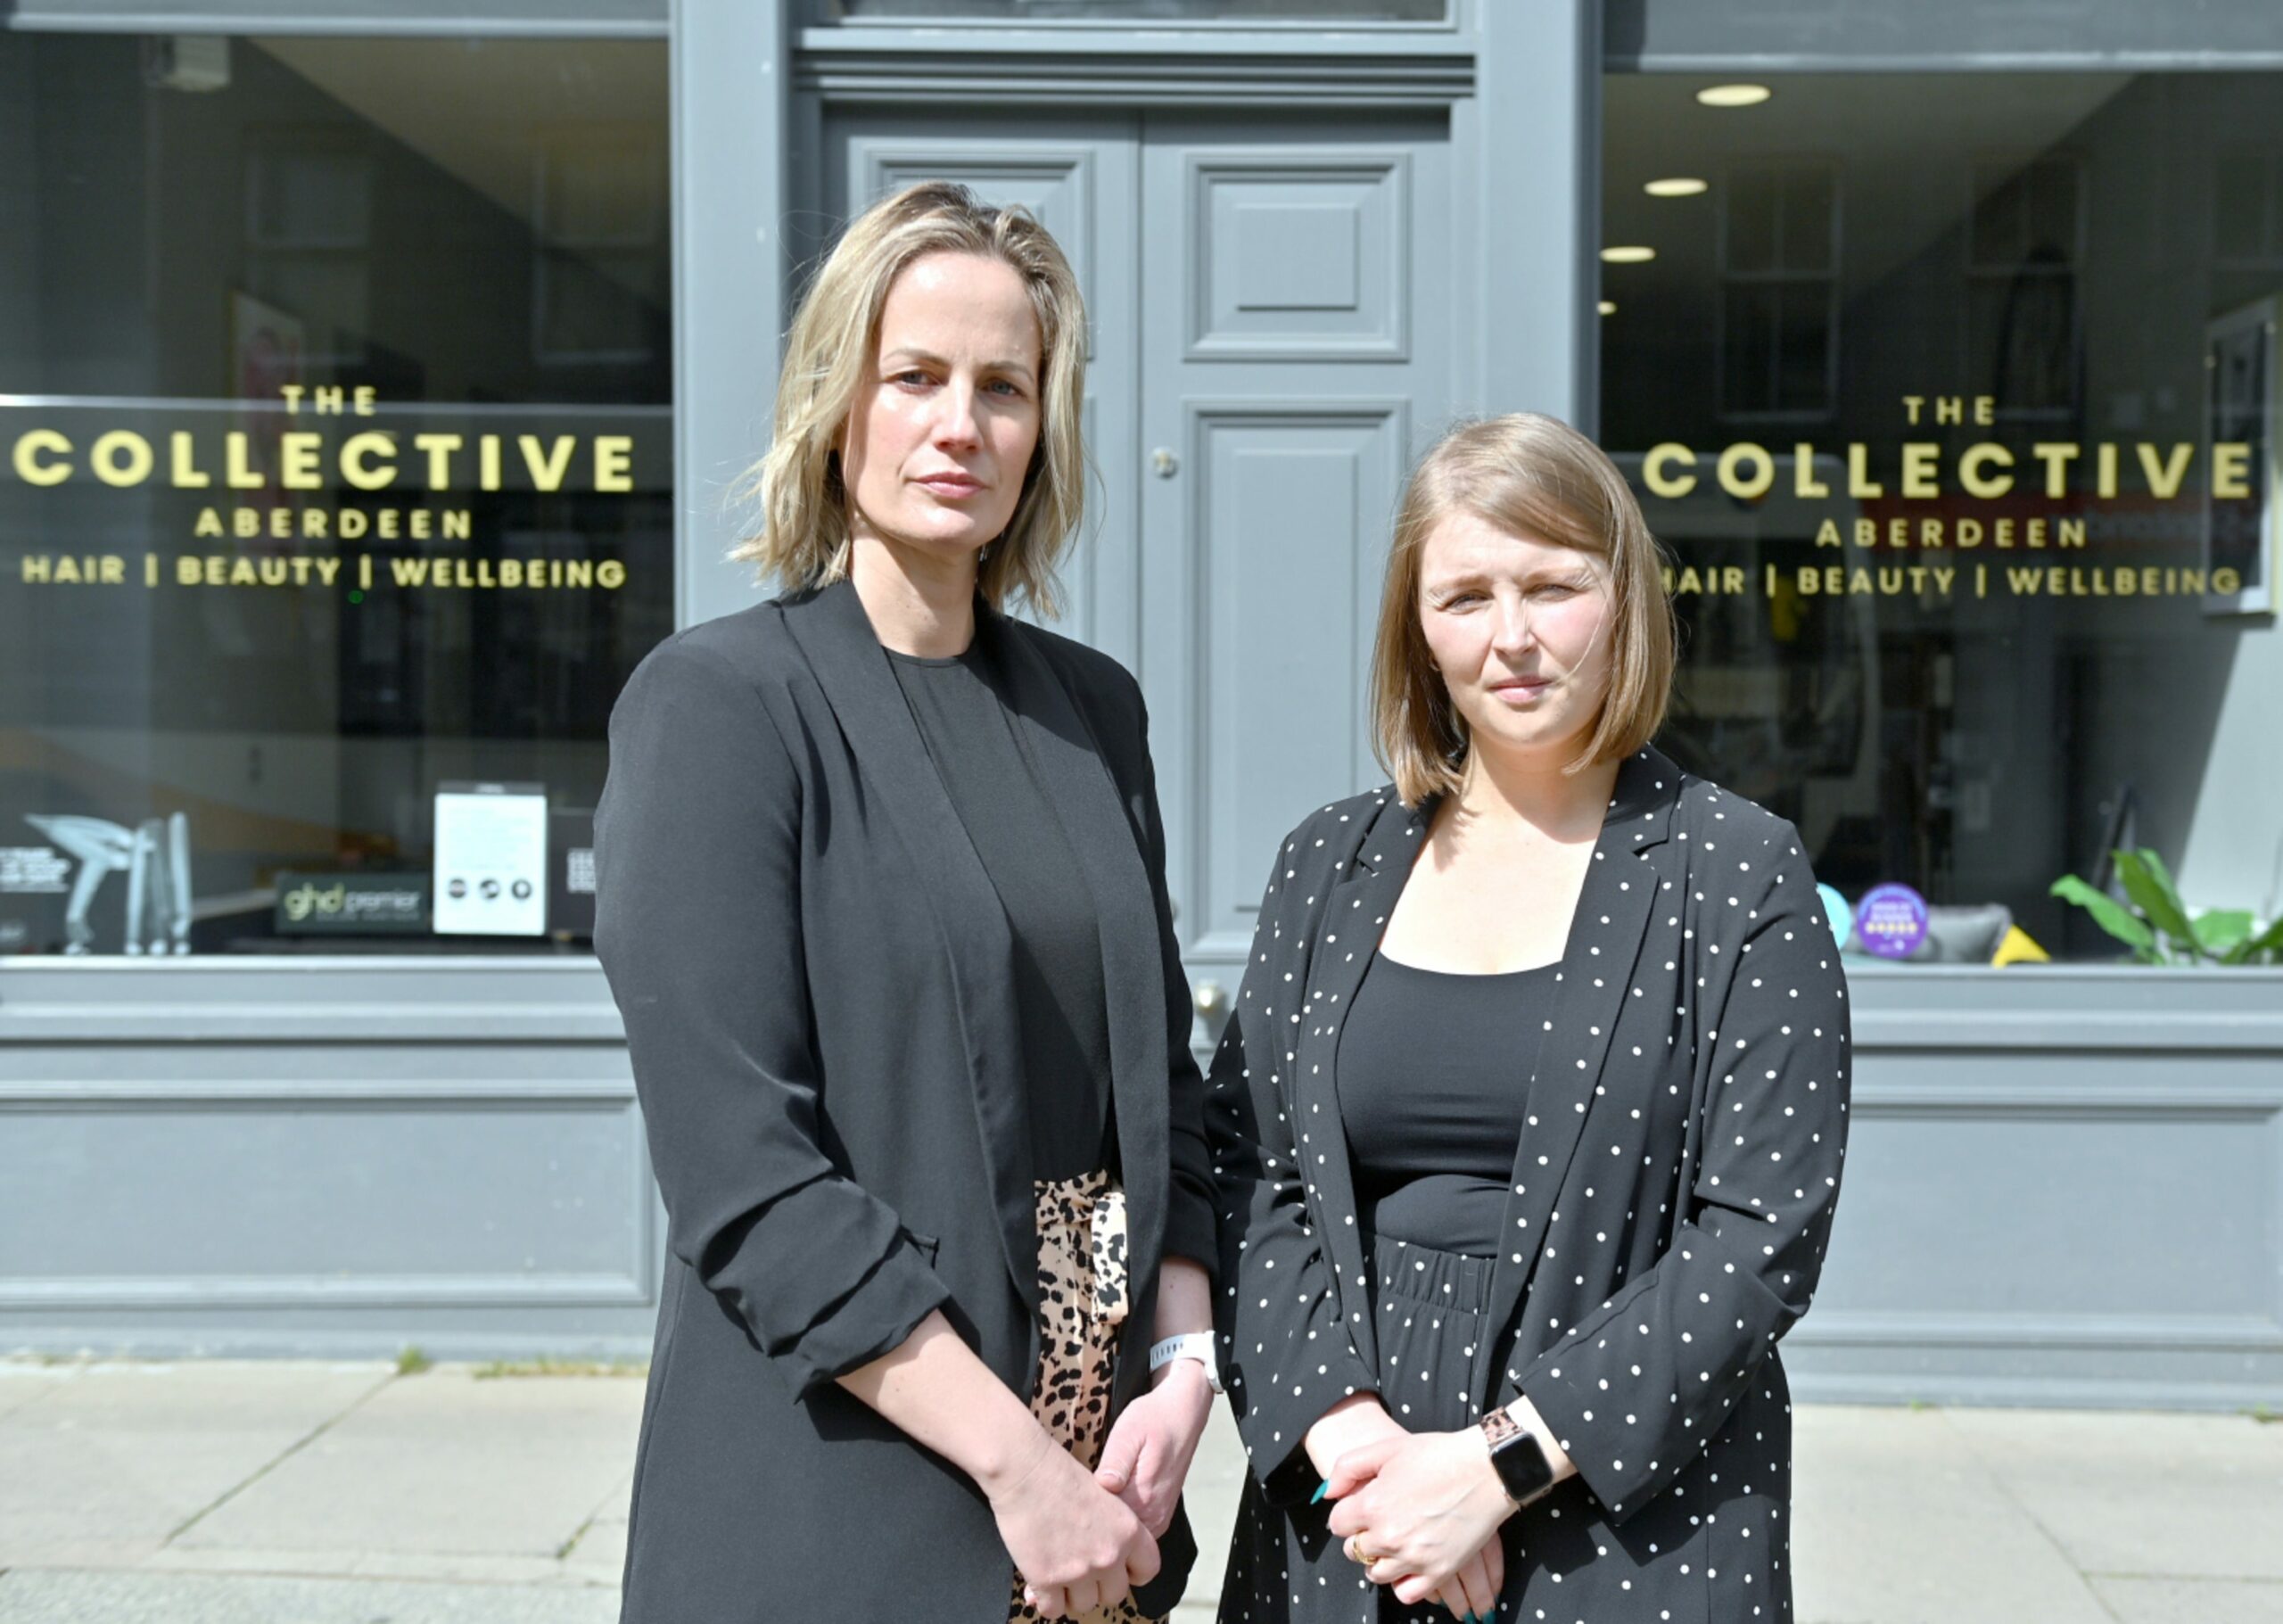 Julie Hulcup and Courtney Forbes in front of The Collective hair salon.